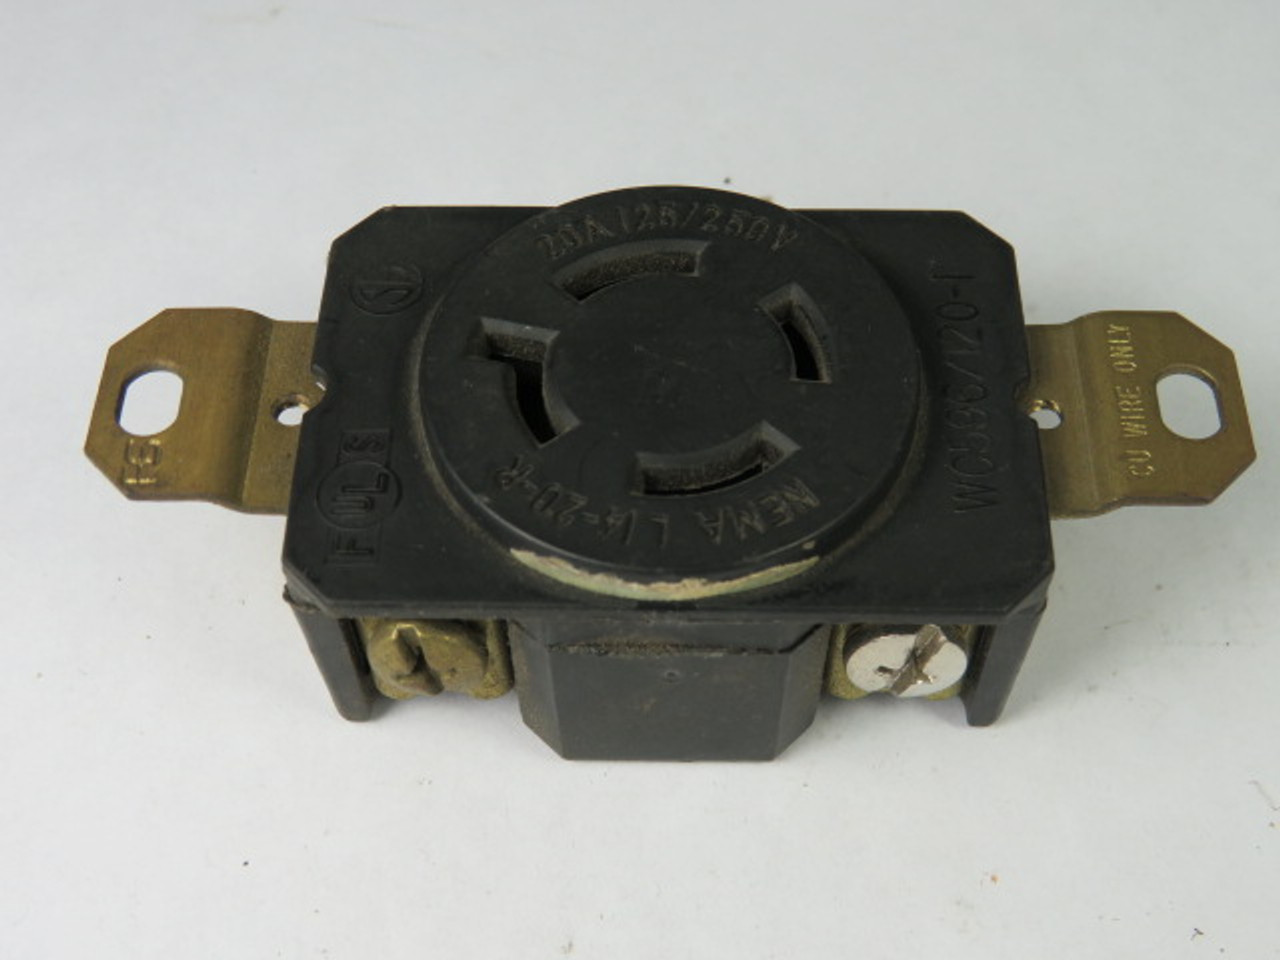 Pass & Seymour L1420-R Turnlok Receptacle 20A 125/250V 4W 3P USED